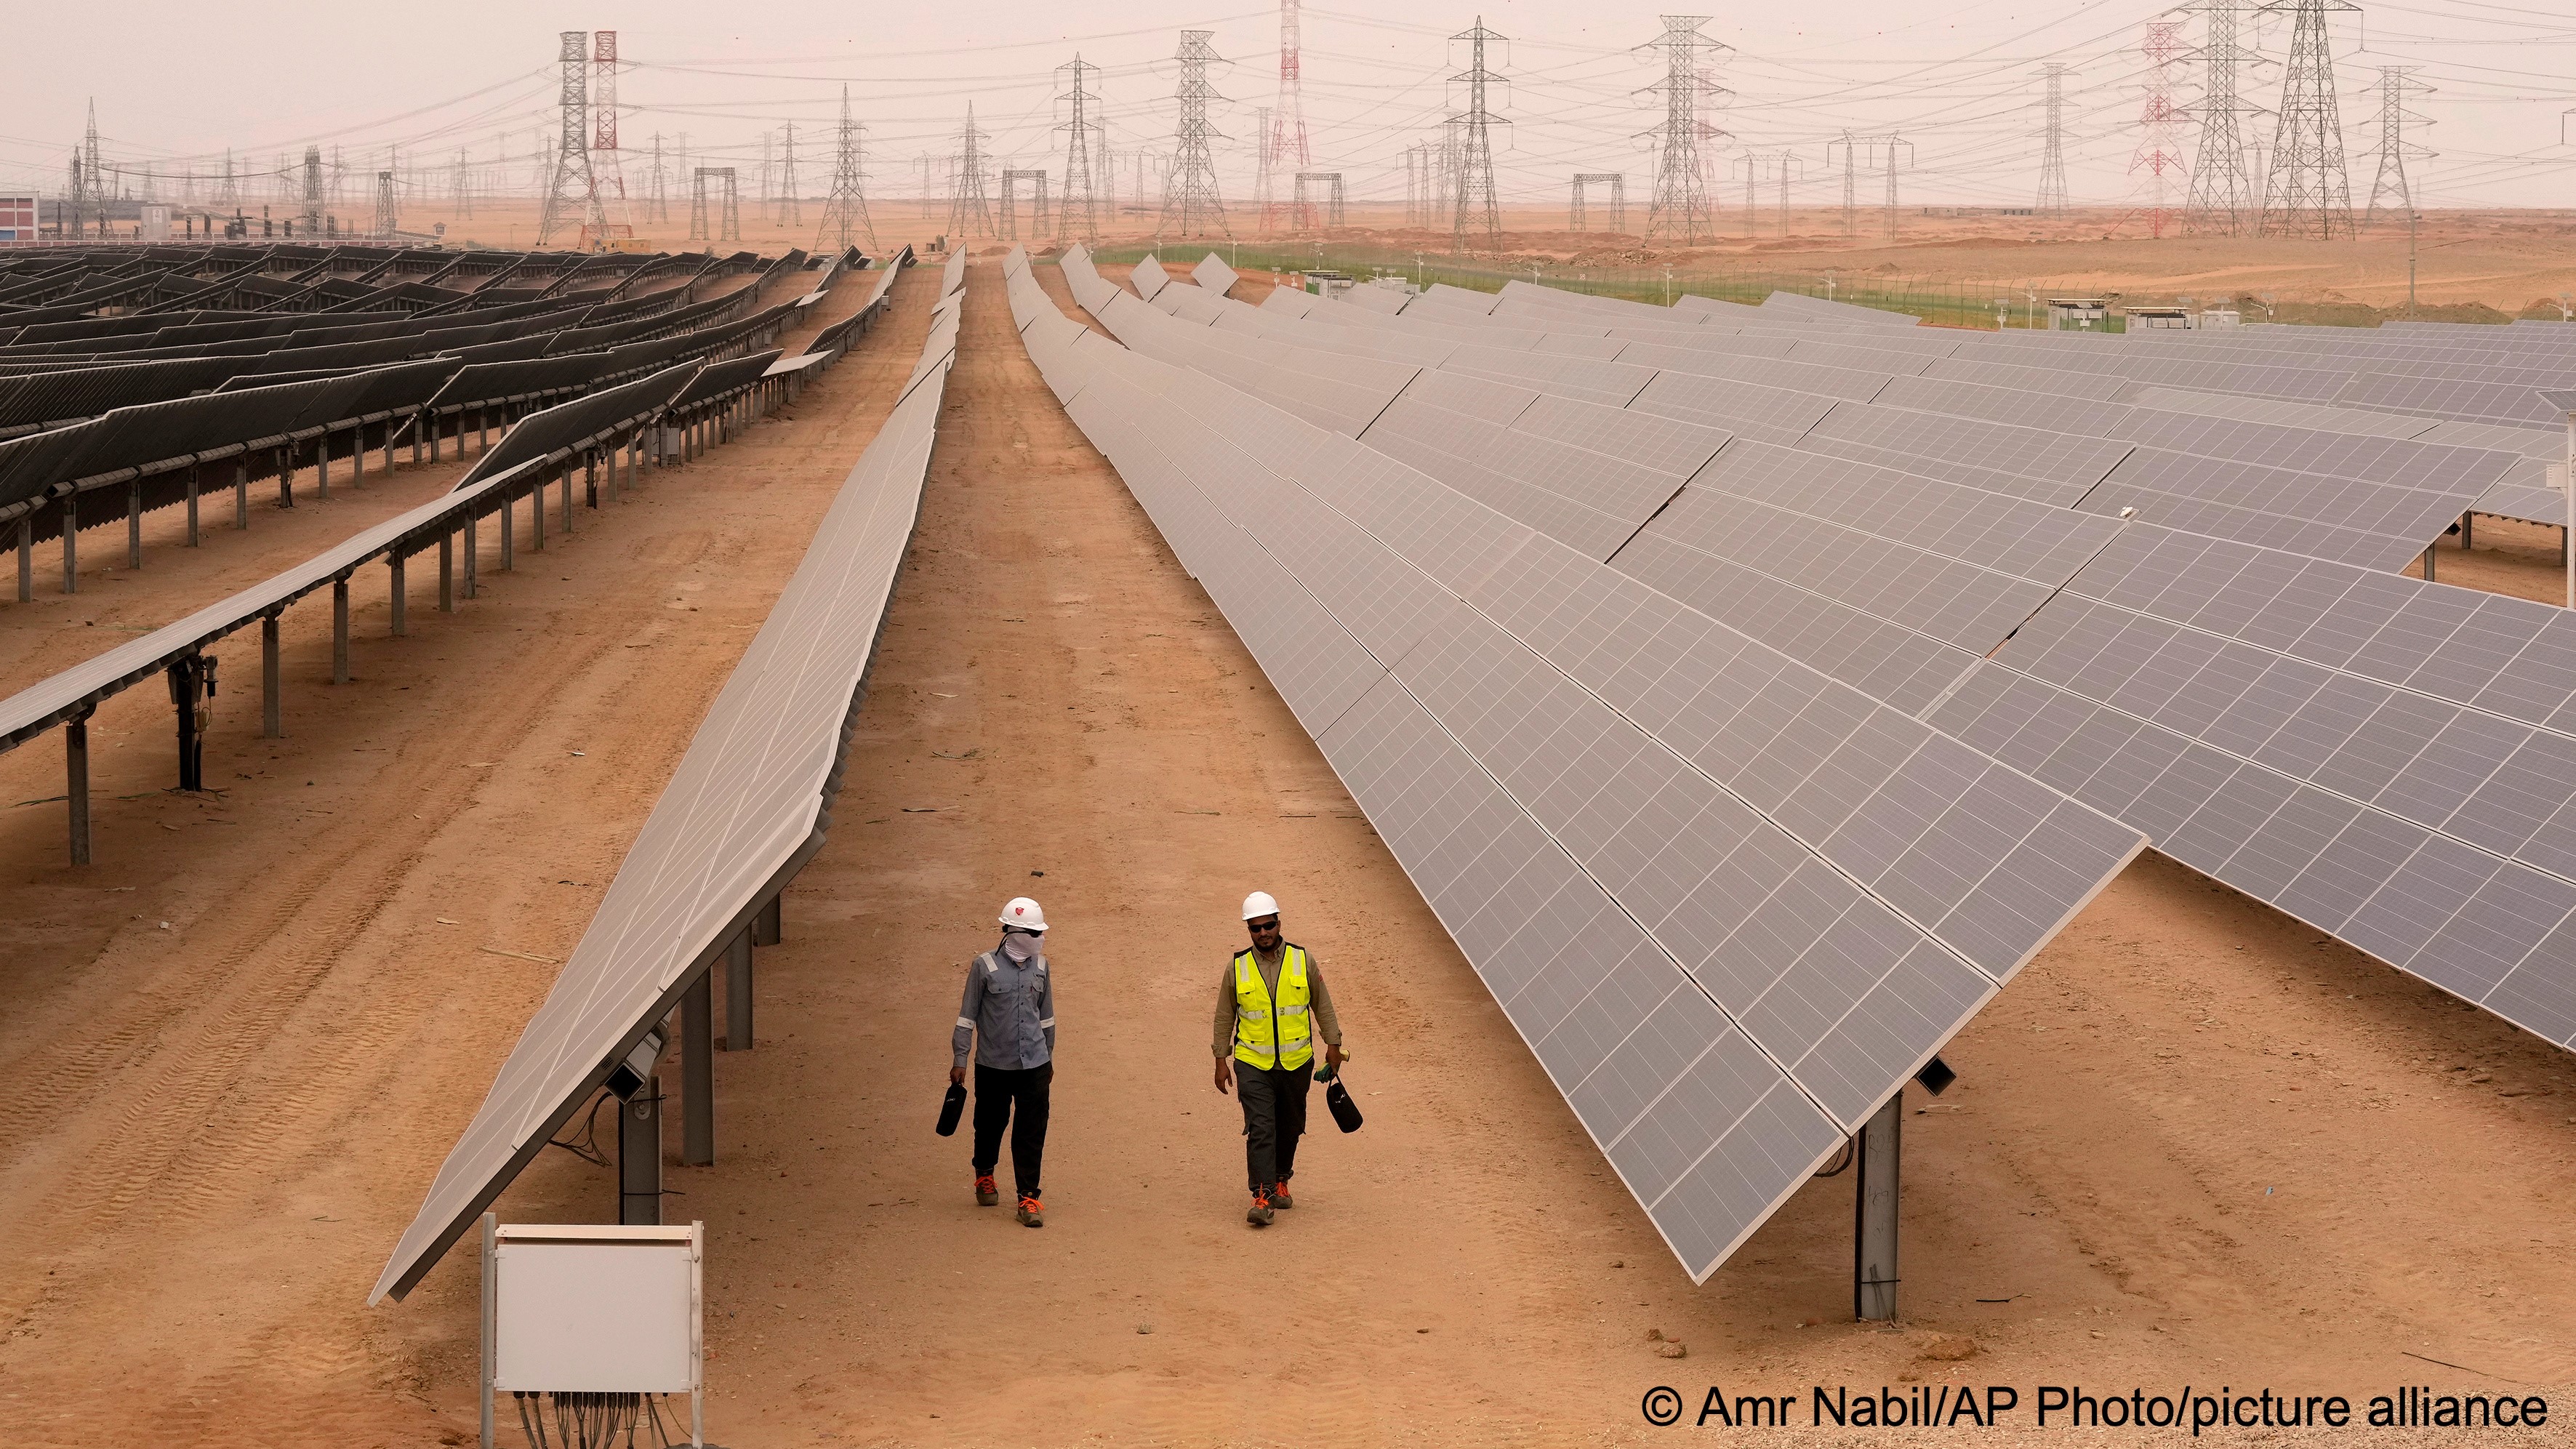 Engineers walk next to solar panels at Benban Solar Park, one of the world’s largest solar power plant in the world, in Aswan, Egypt, Wednesday, 19 October 2022 (photo: AP Photo/Amr Nabil)